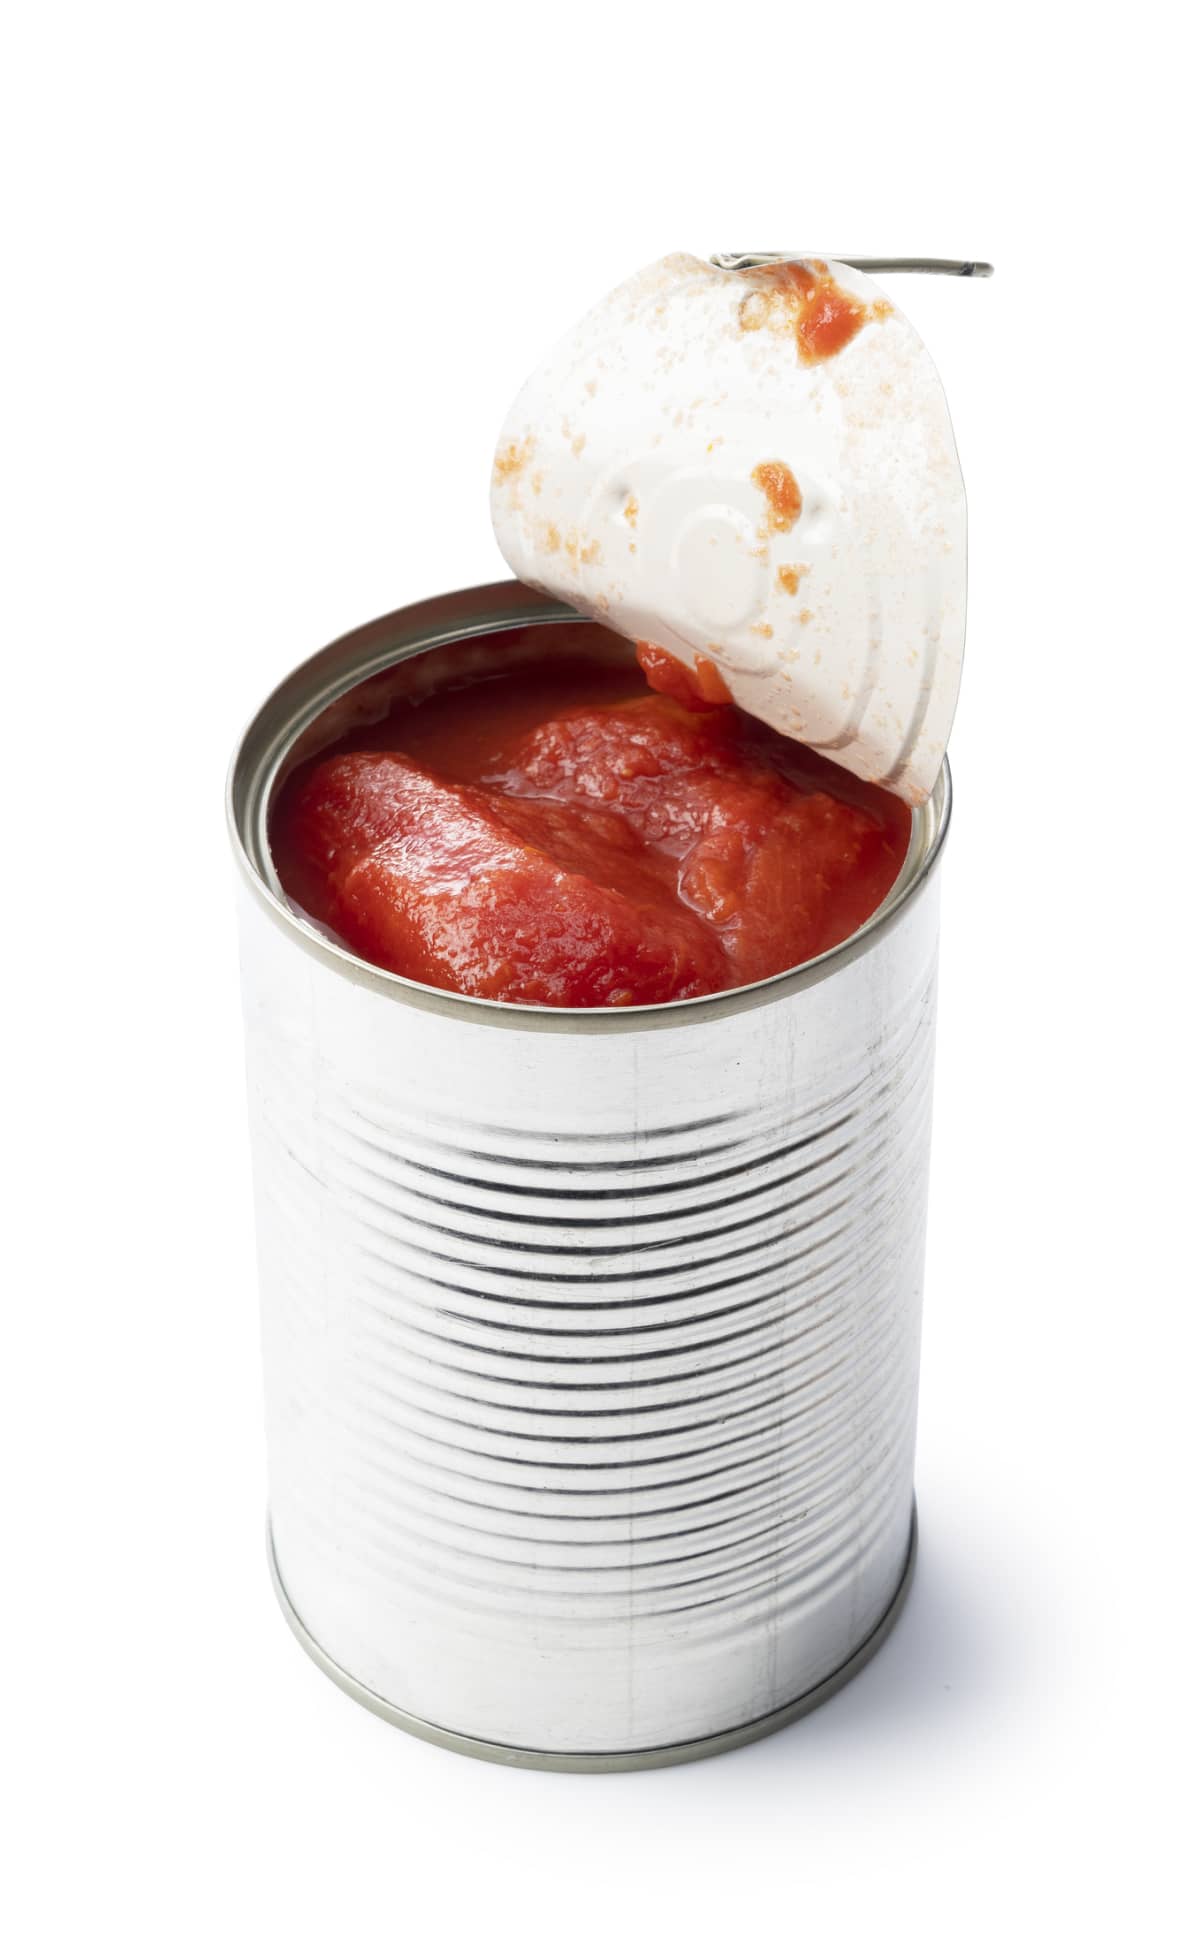 Whole tomato cans on a white background